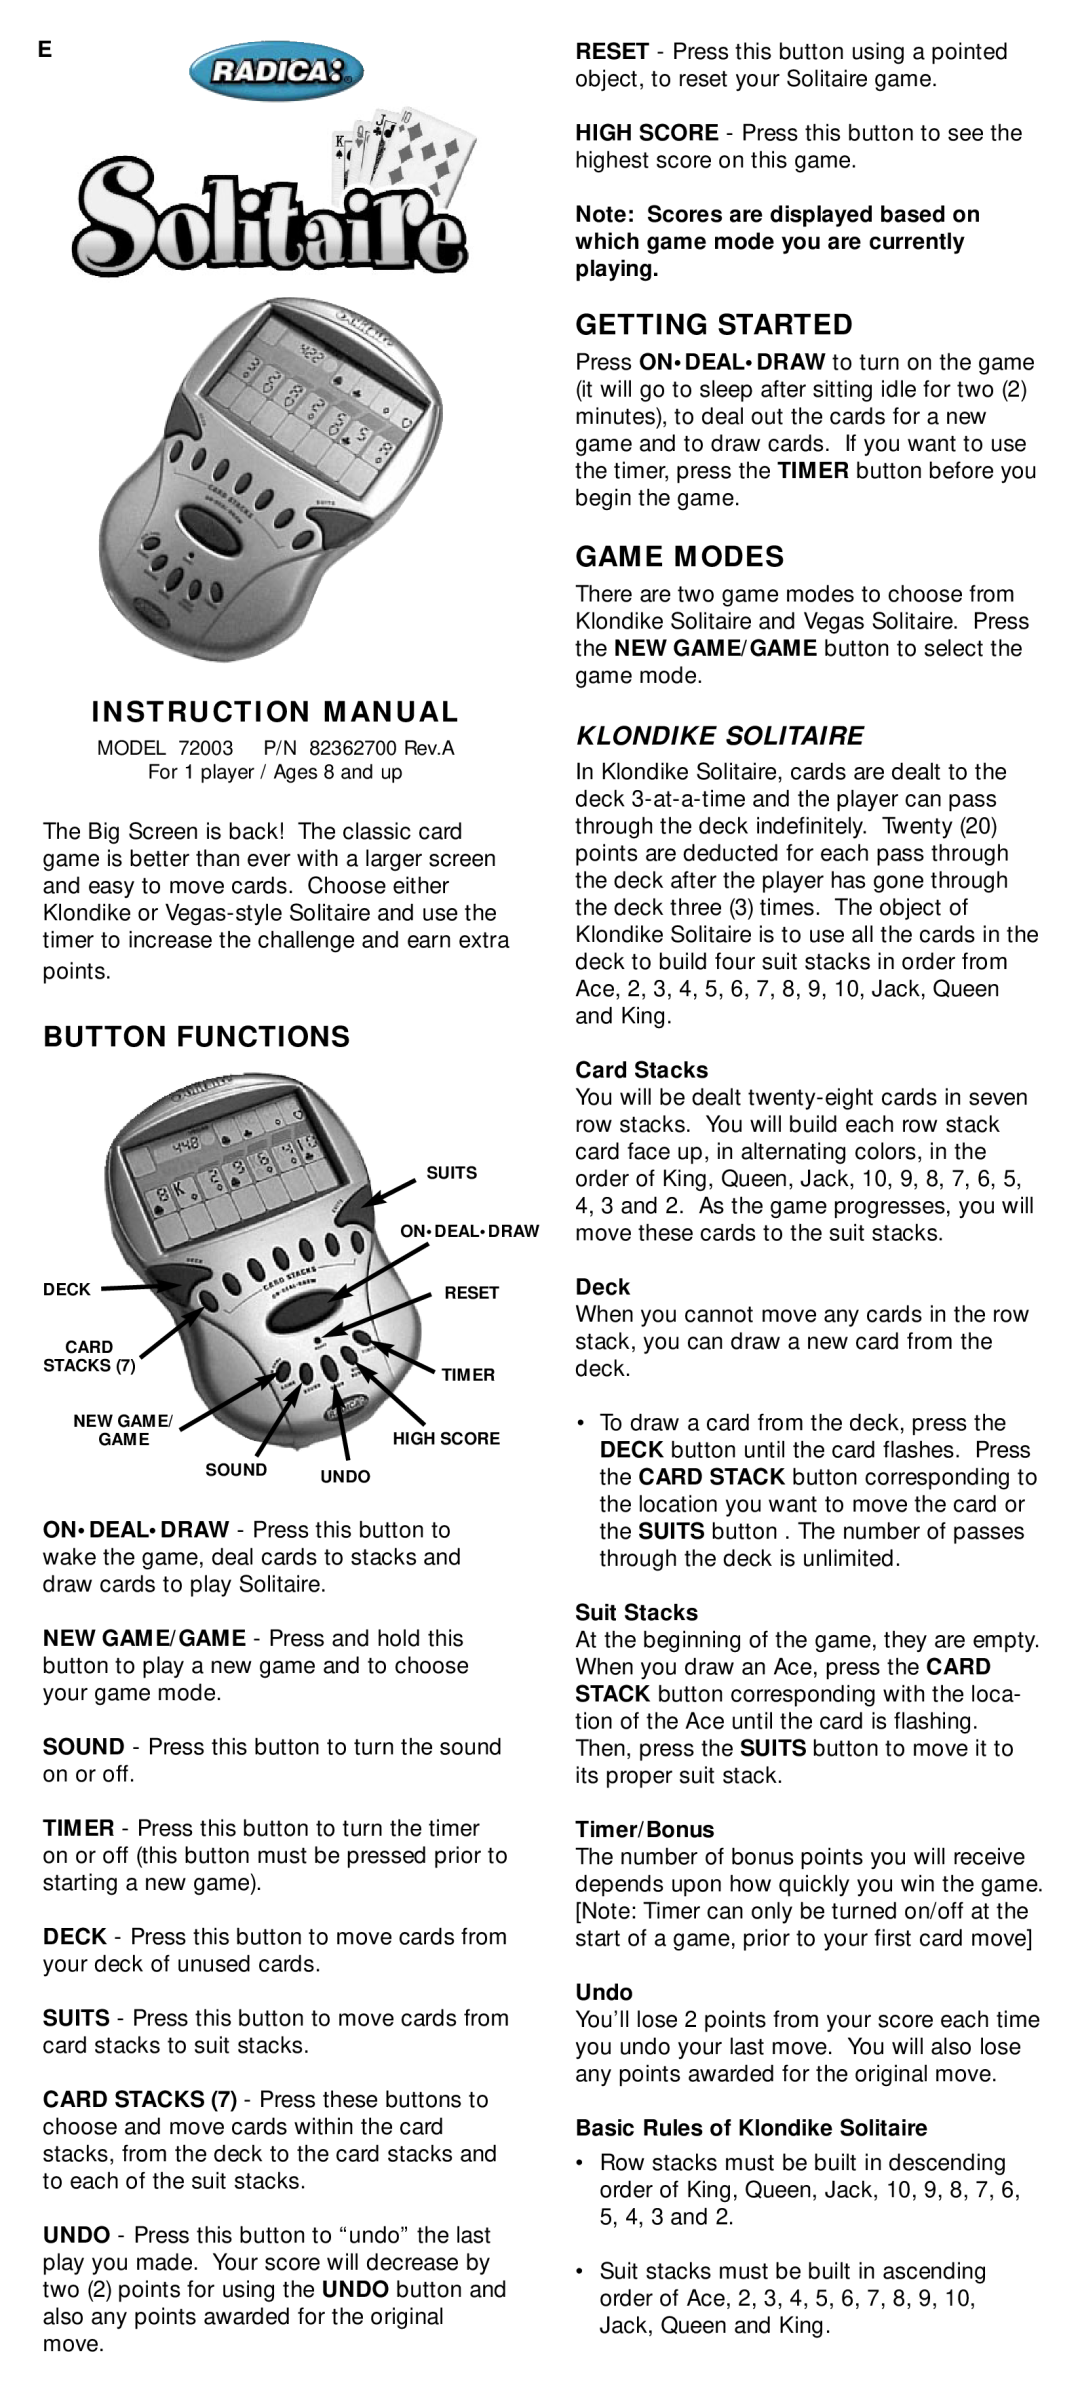 Radica Games 72003 instruction manual Button Functions, Getting Started, Game Modes, Klondike Solitaire, Card Stacks, Deck 